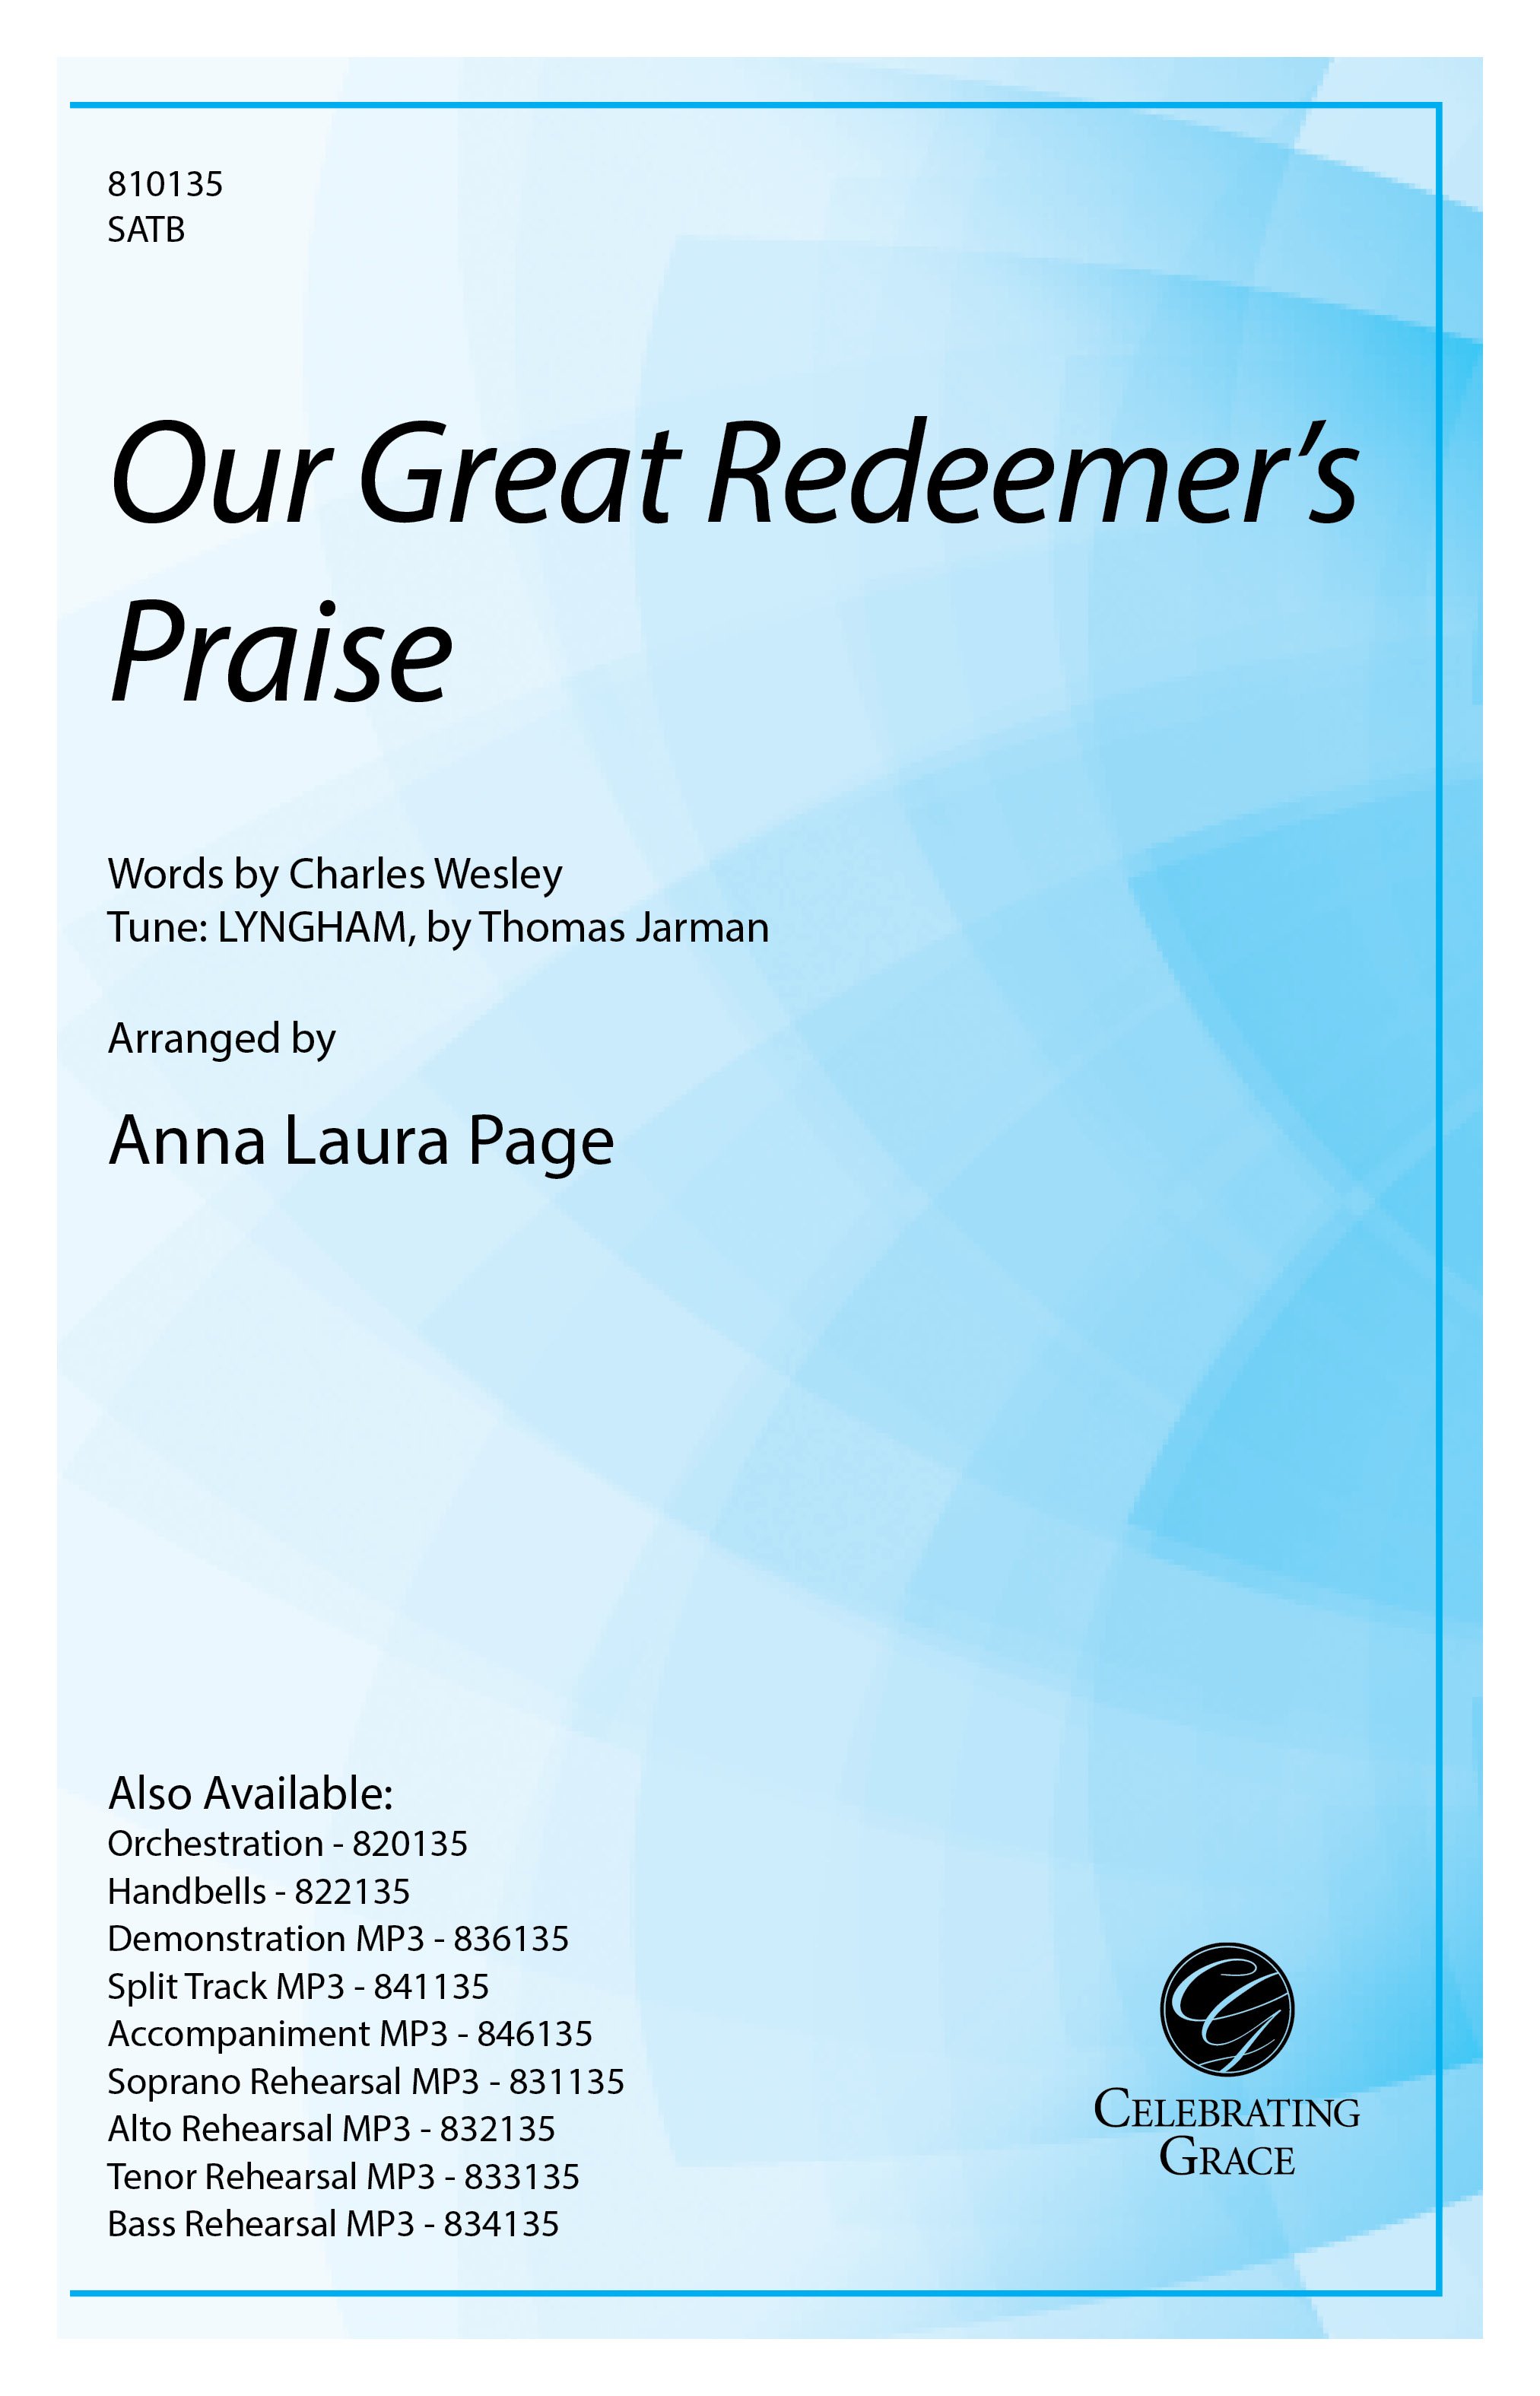 Our Great Redeemer's Praise